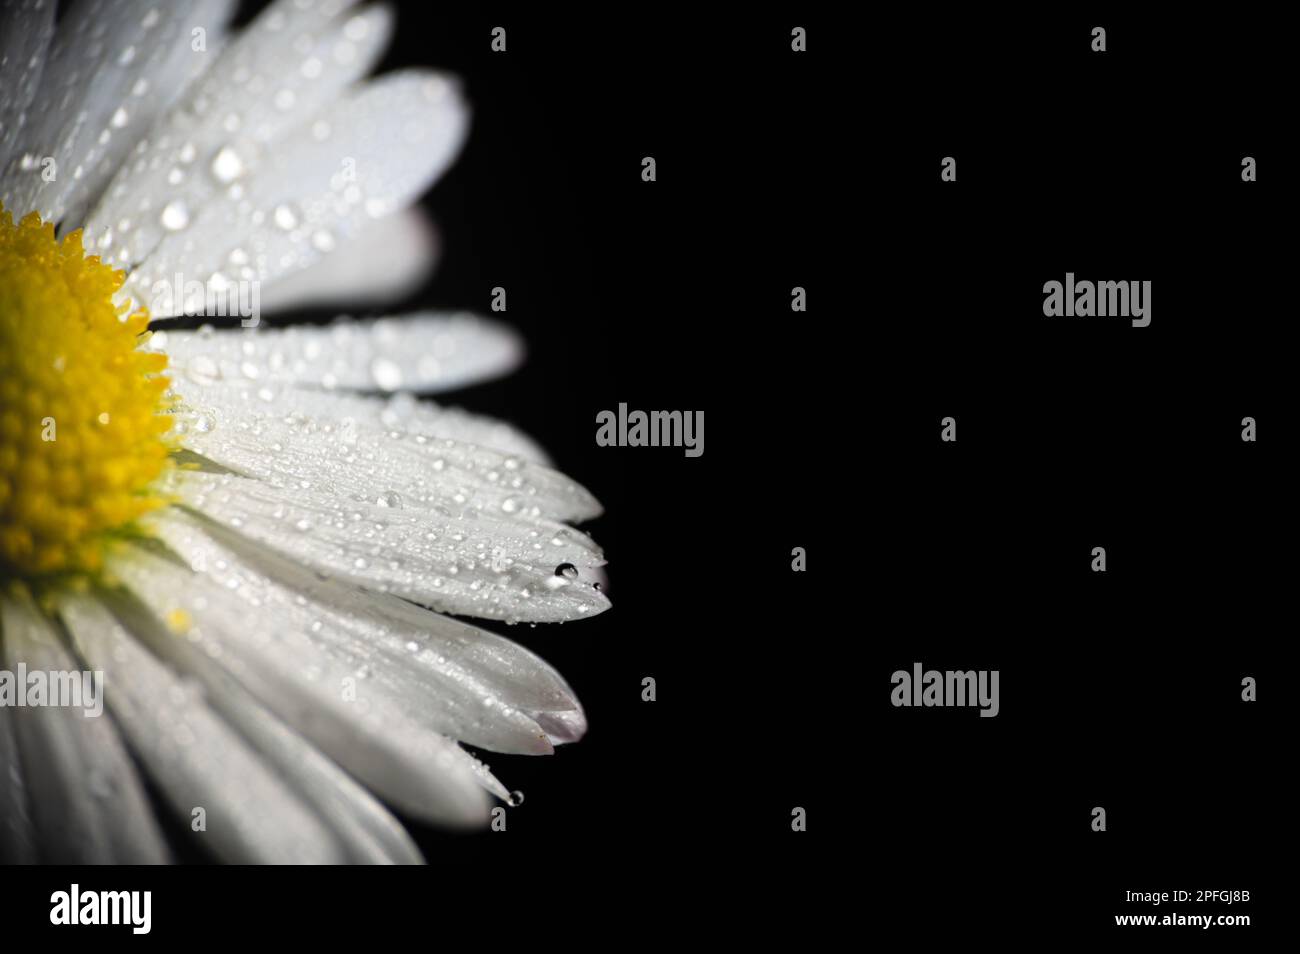 Close up daisy flower (Bellis perennis) photo. Extreme macro. Drops, droplets on white petals. Stock Photo